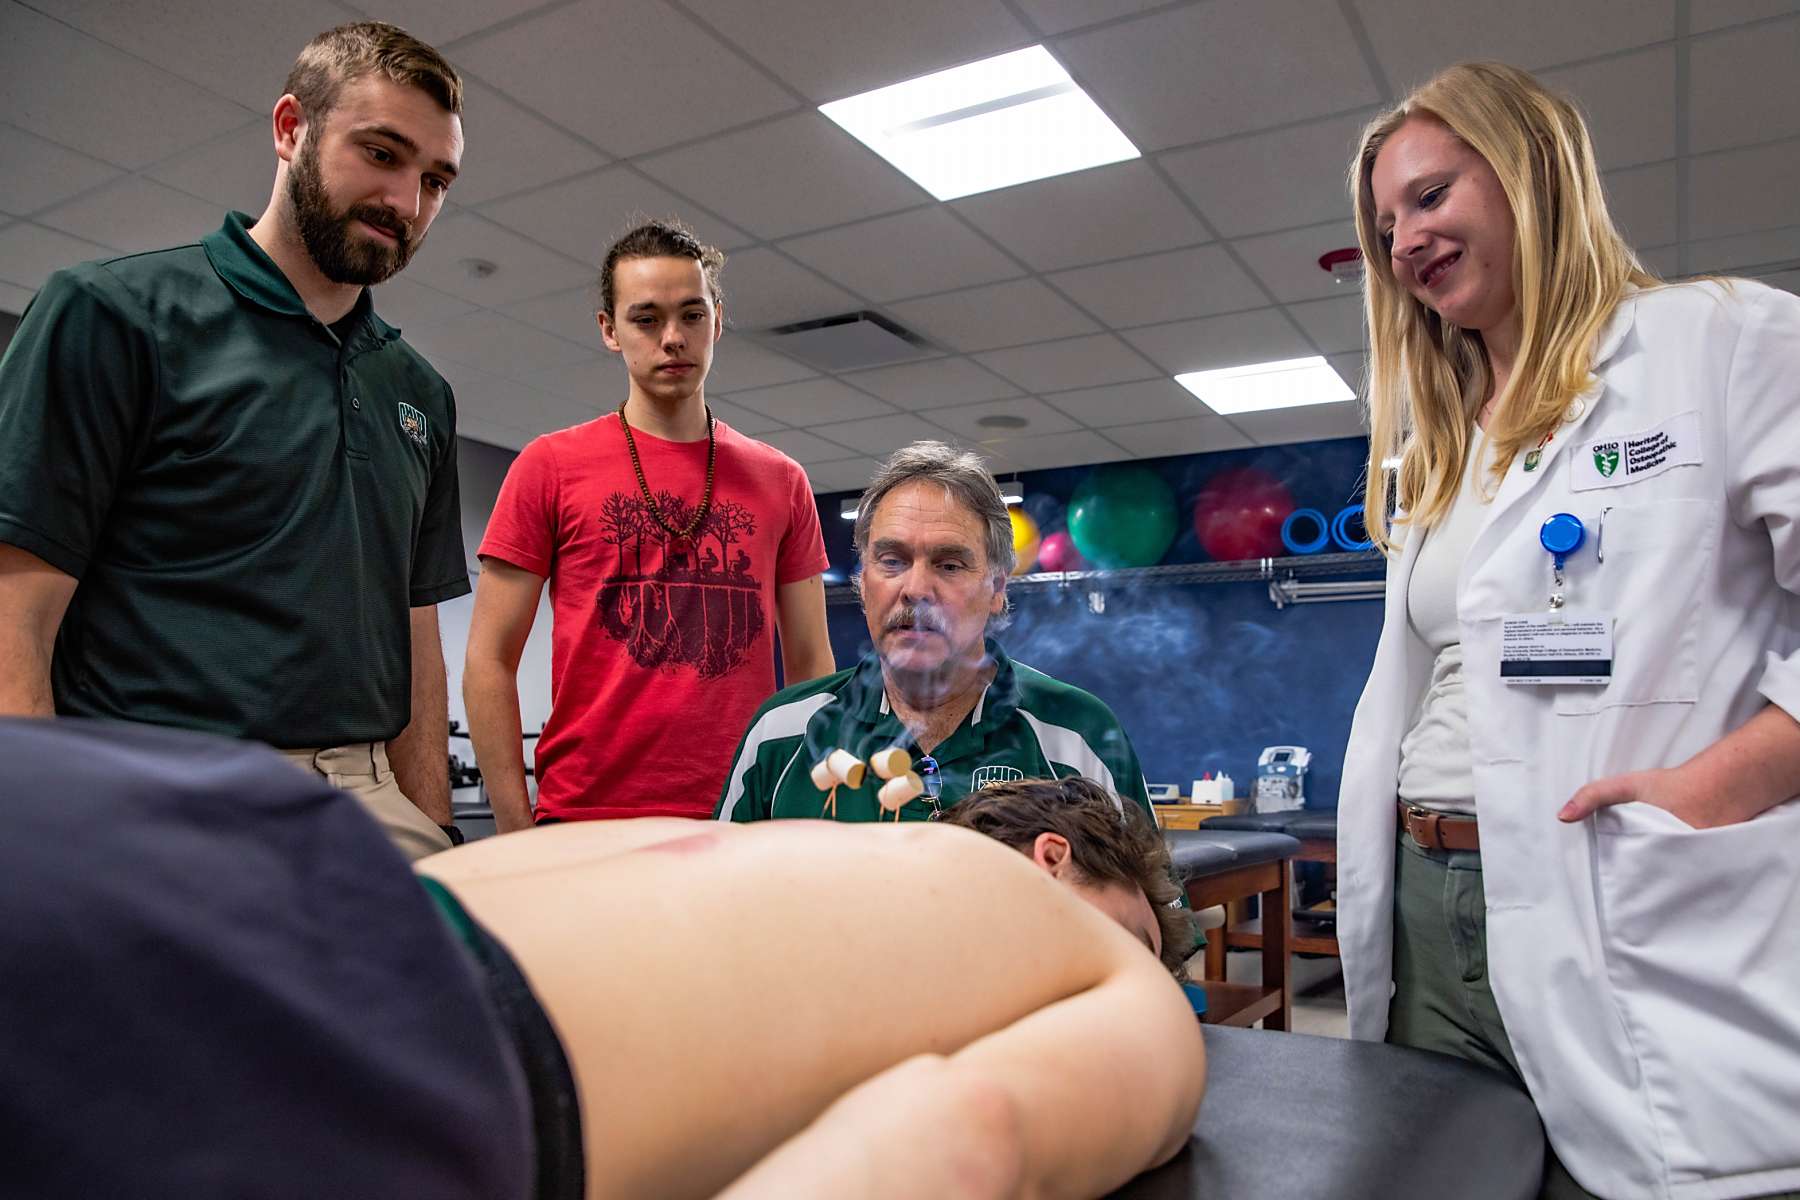 Medical students observe as a volunteer receives acupuncture treatment